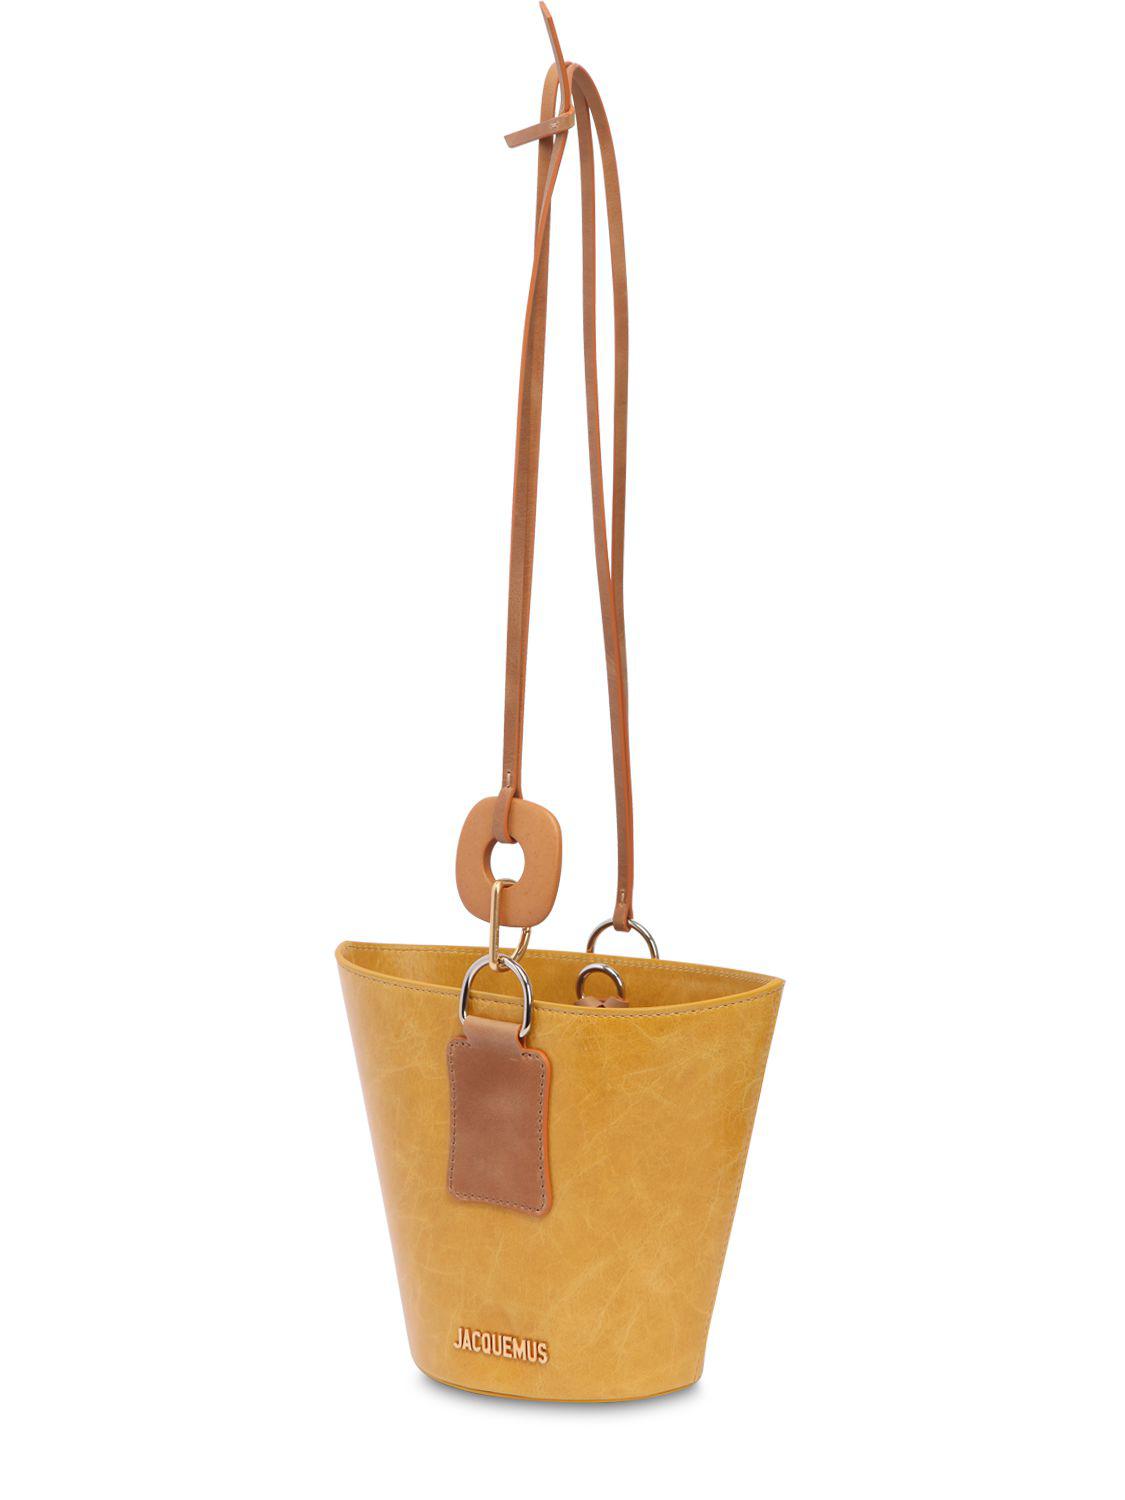 Jacquemus Praia Leather Bucket Bag in Yellow - Lyst